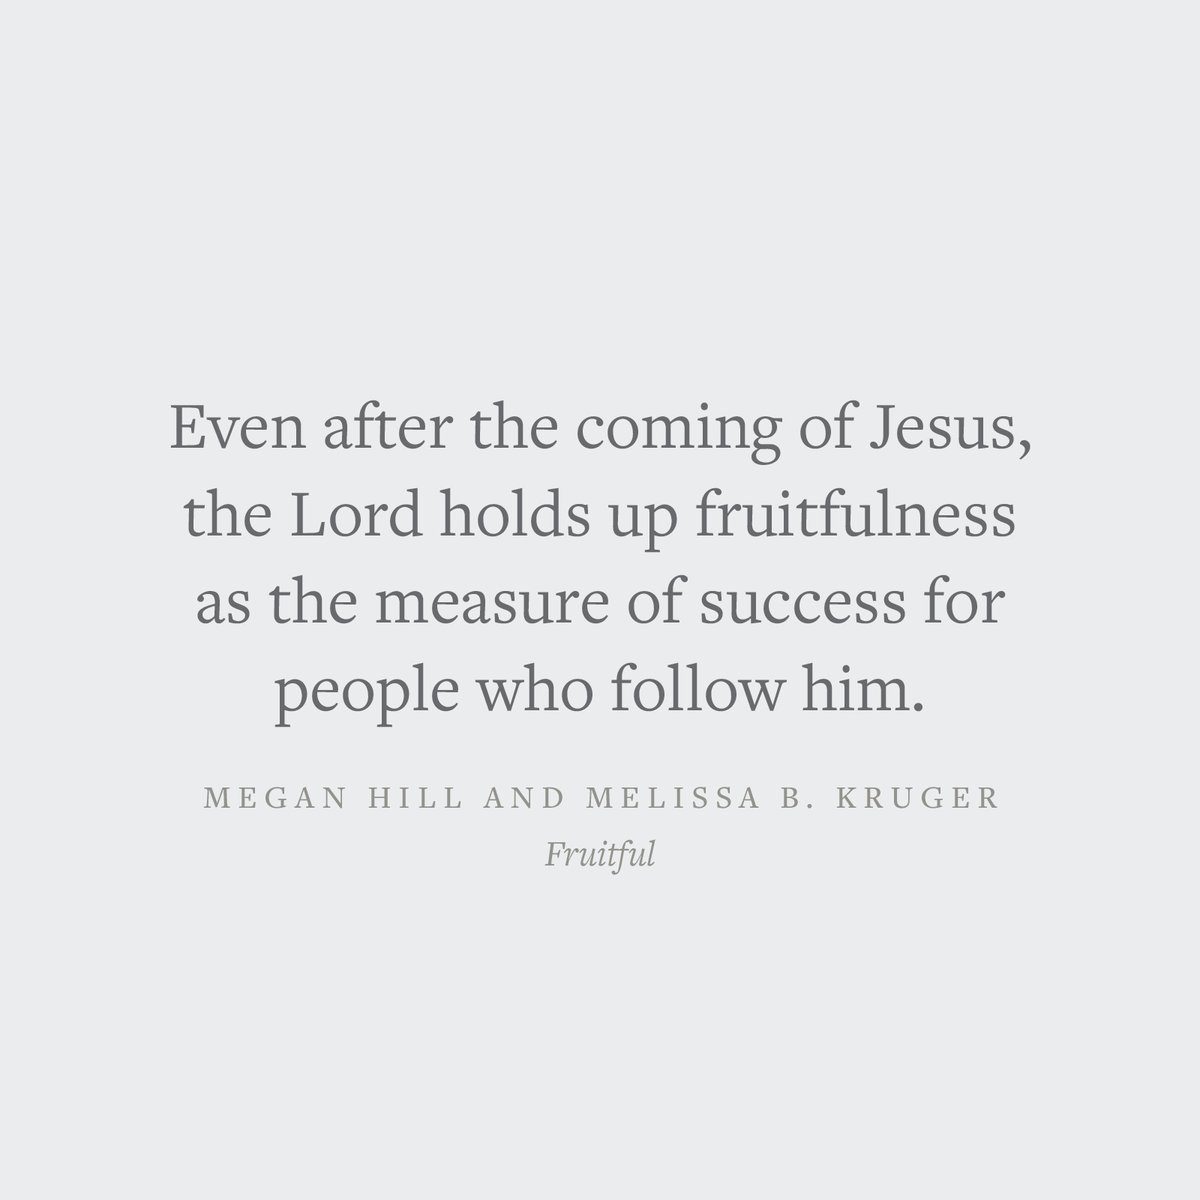 'Even after the coming of Jesus, the Lord holds up fruitfulness as the measure of success for people who follow him.' —Megan Hill and Melissa B. Kruger Crossway.org/fruitful/